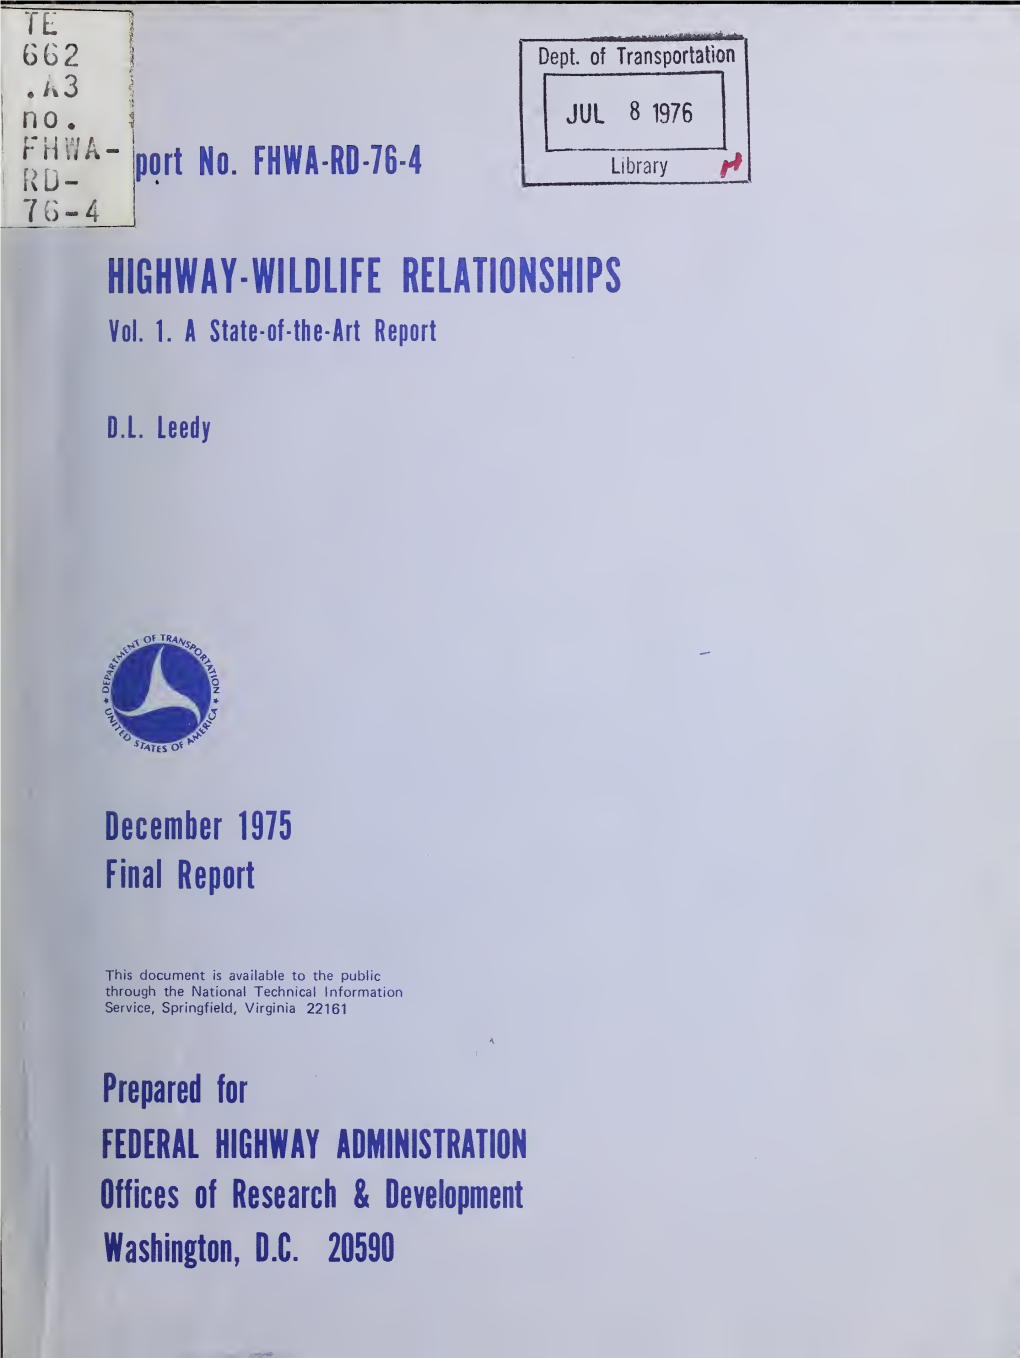 Highway-Wildlife Relationships : Vol. 1, a State-Of-The-Art Report